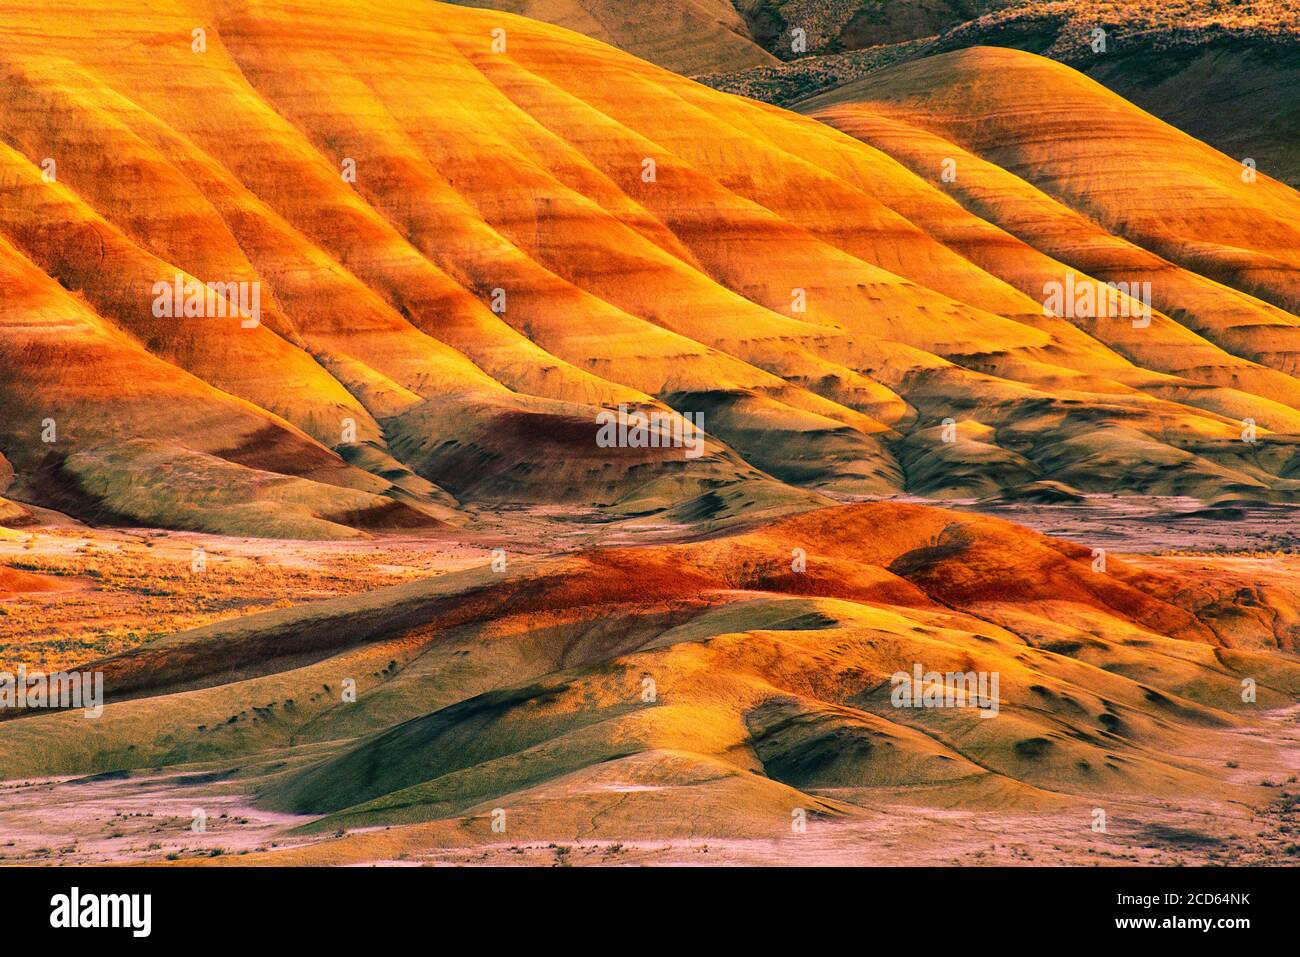 John Day Fossil Beds National Monument, Painted Hills Unit, Oregon, USA Stock Photo